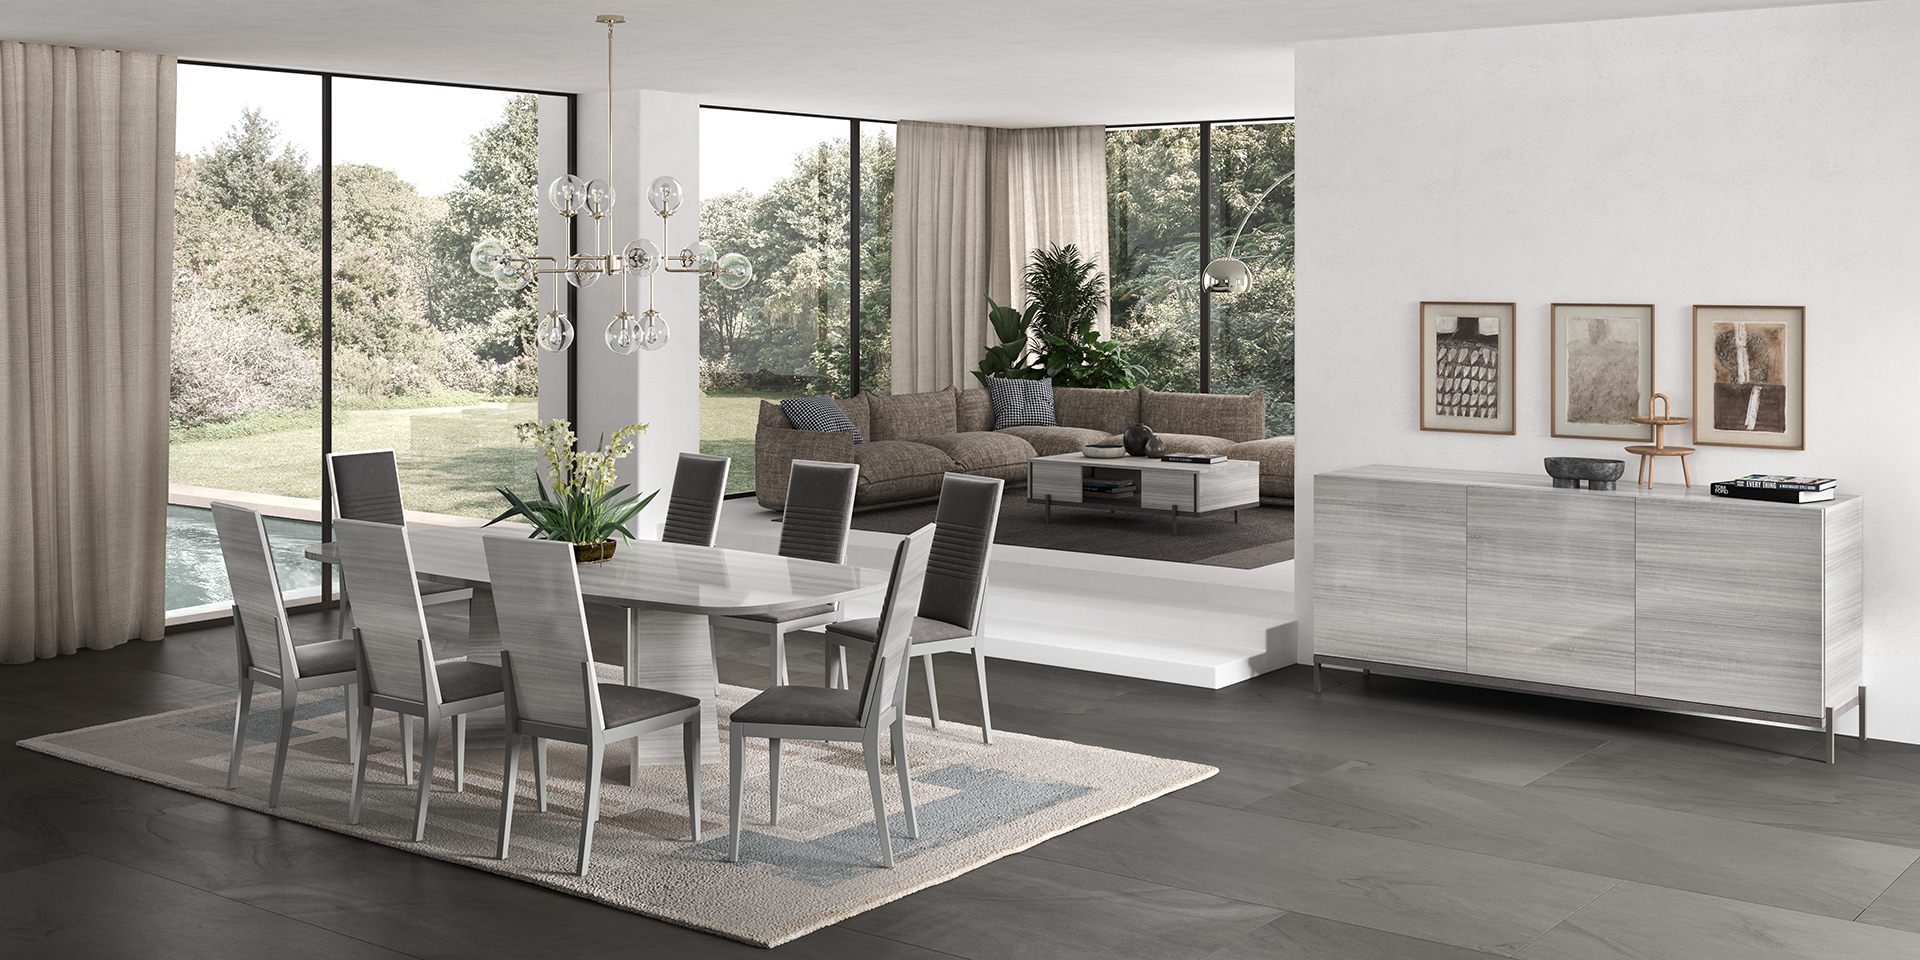 Dining Room Furniture Kitchen Tables and Chairs Sets Mia Dining room Additional items